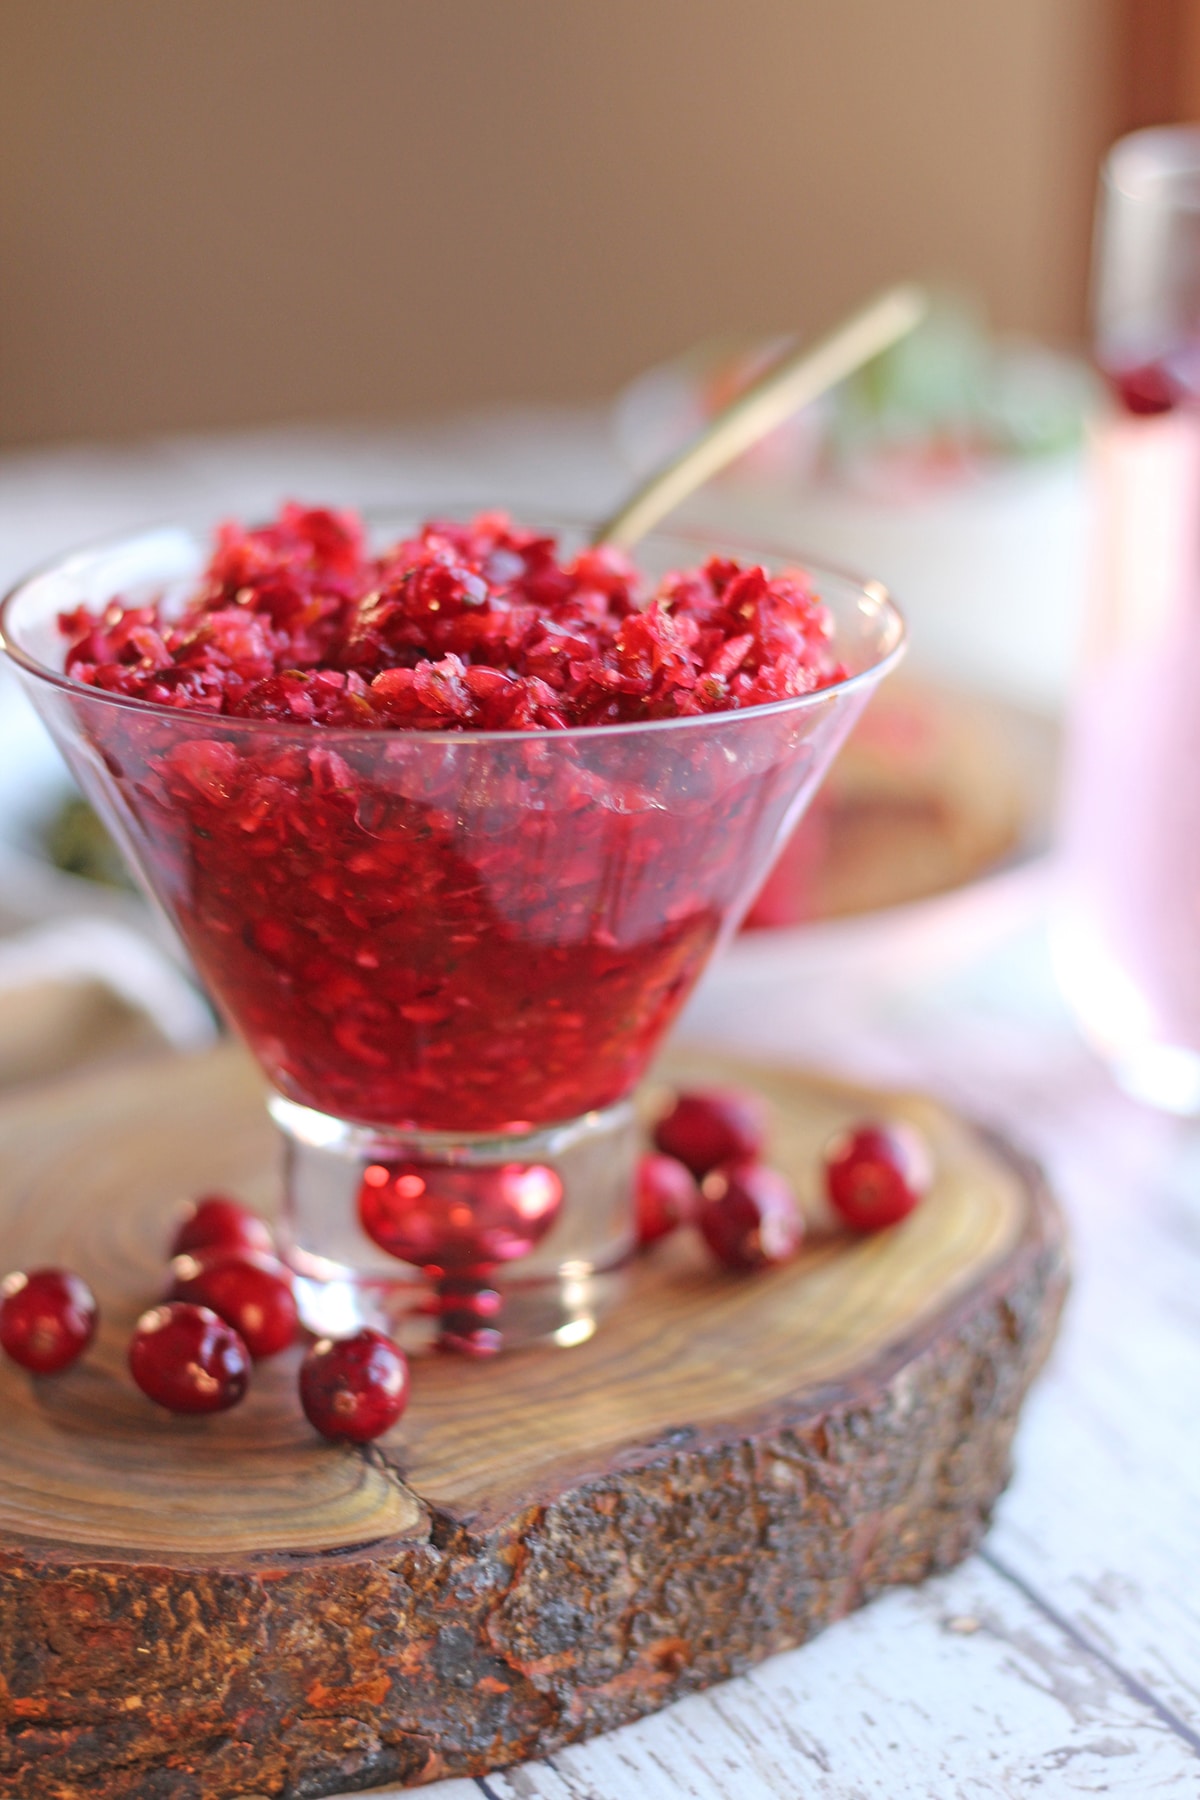 Cranberry salsa in cocktail glass by whole cranberries.